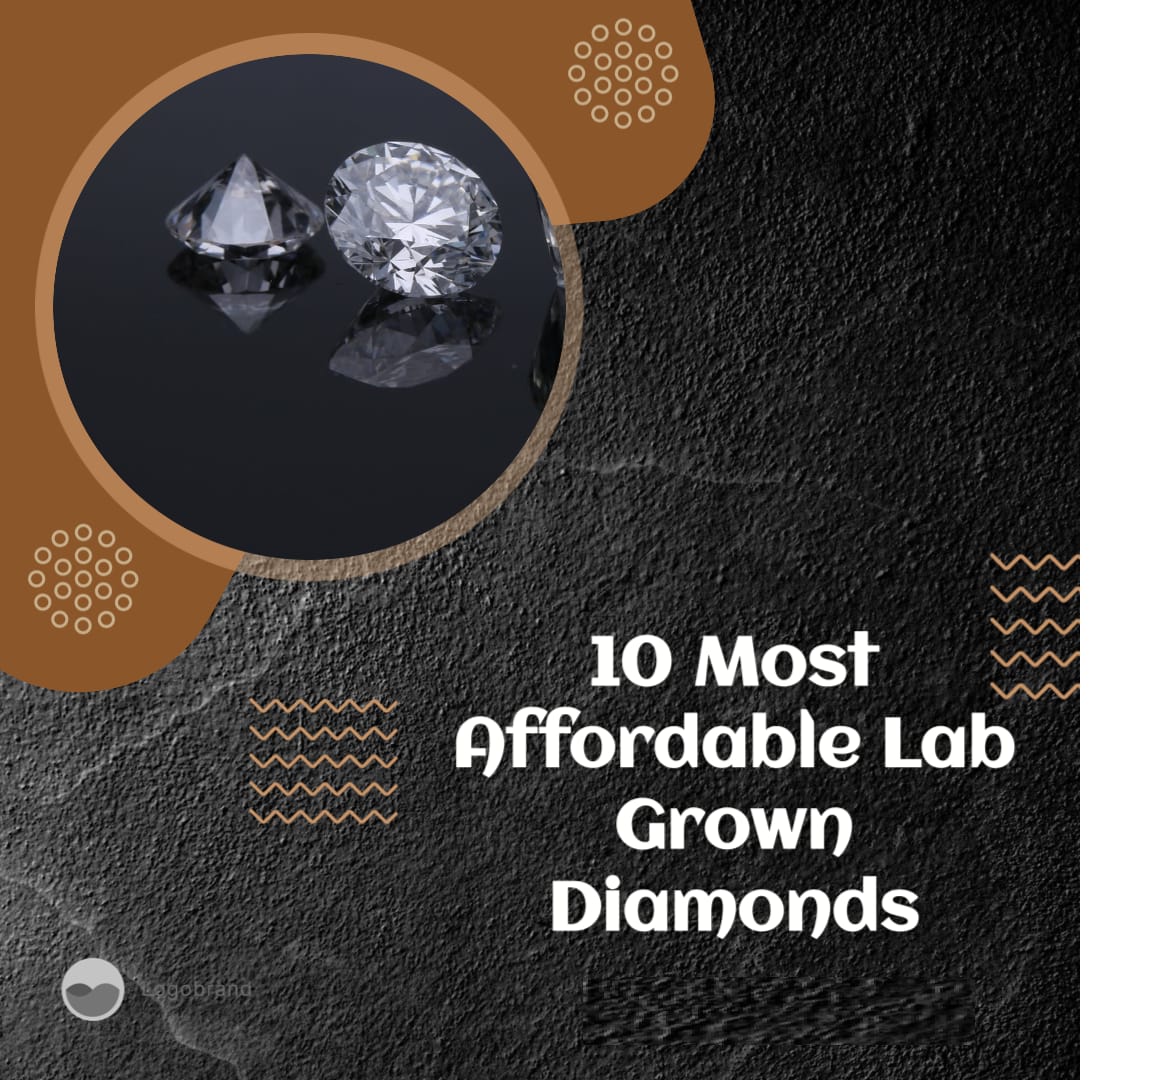 10 Most Affordable Lab Grown Diamonds